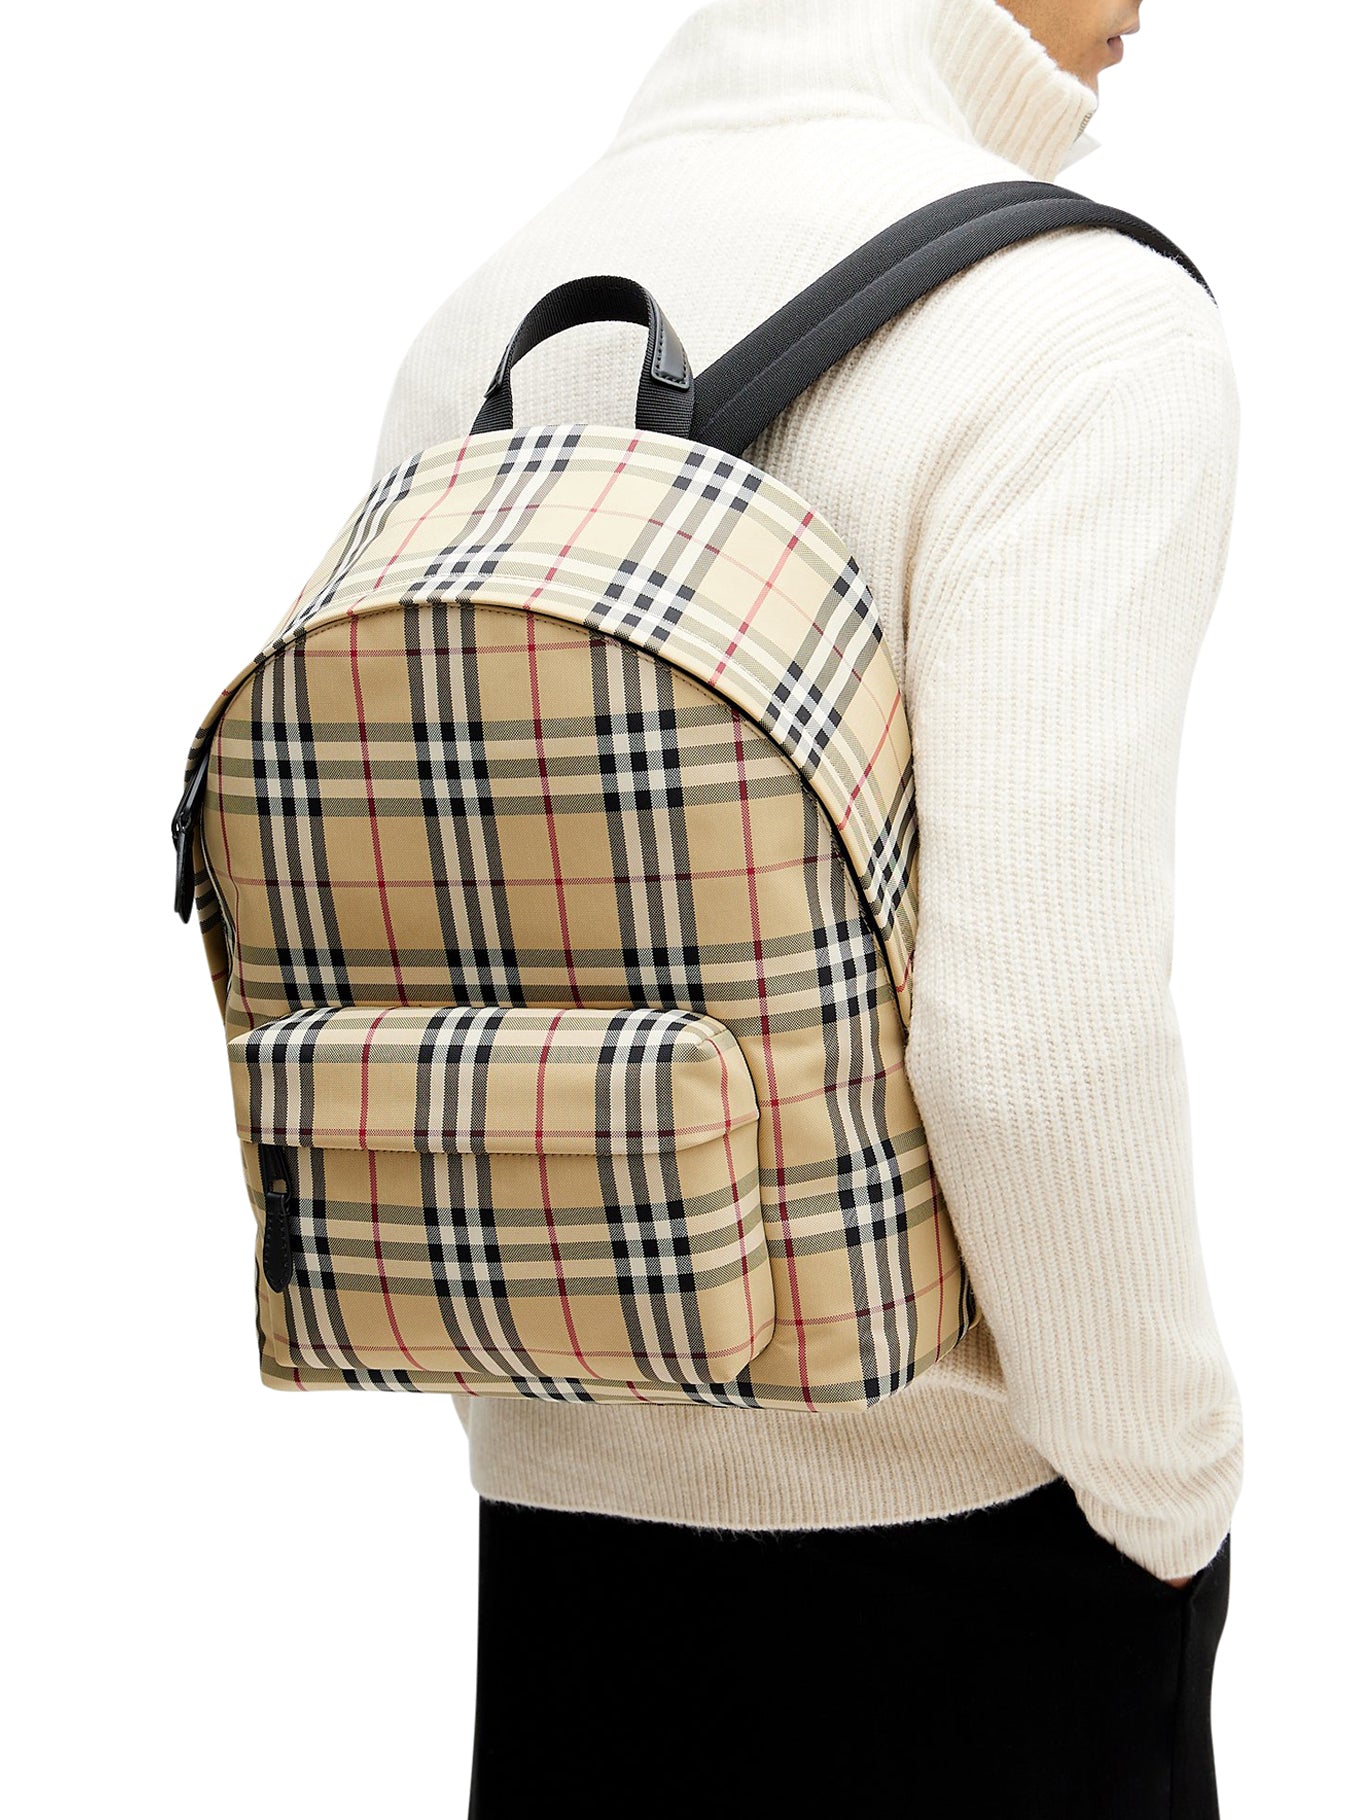 Jett backpack with Vintage Check motif